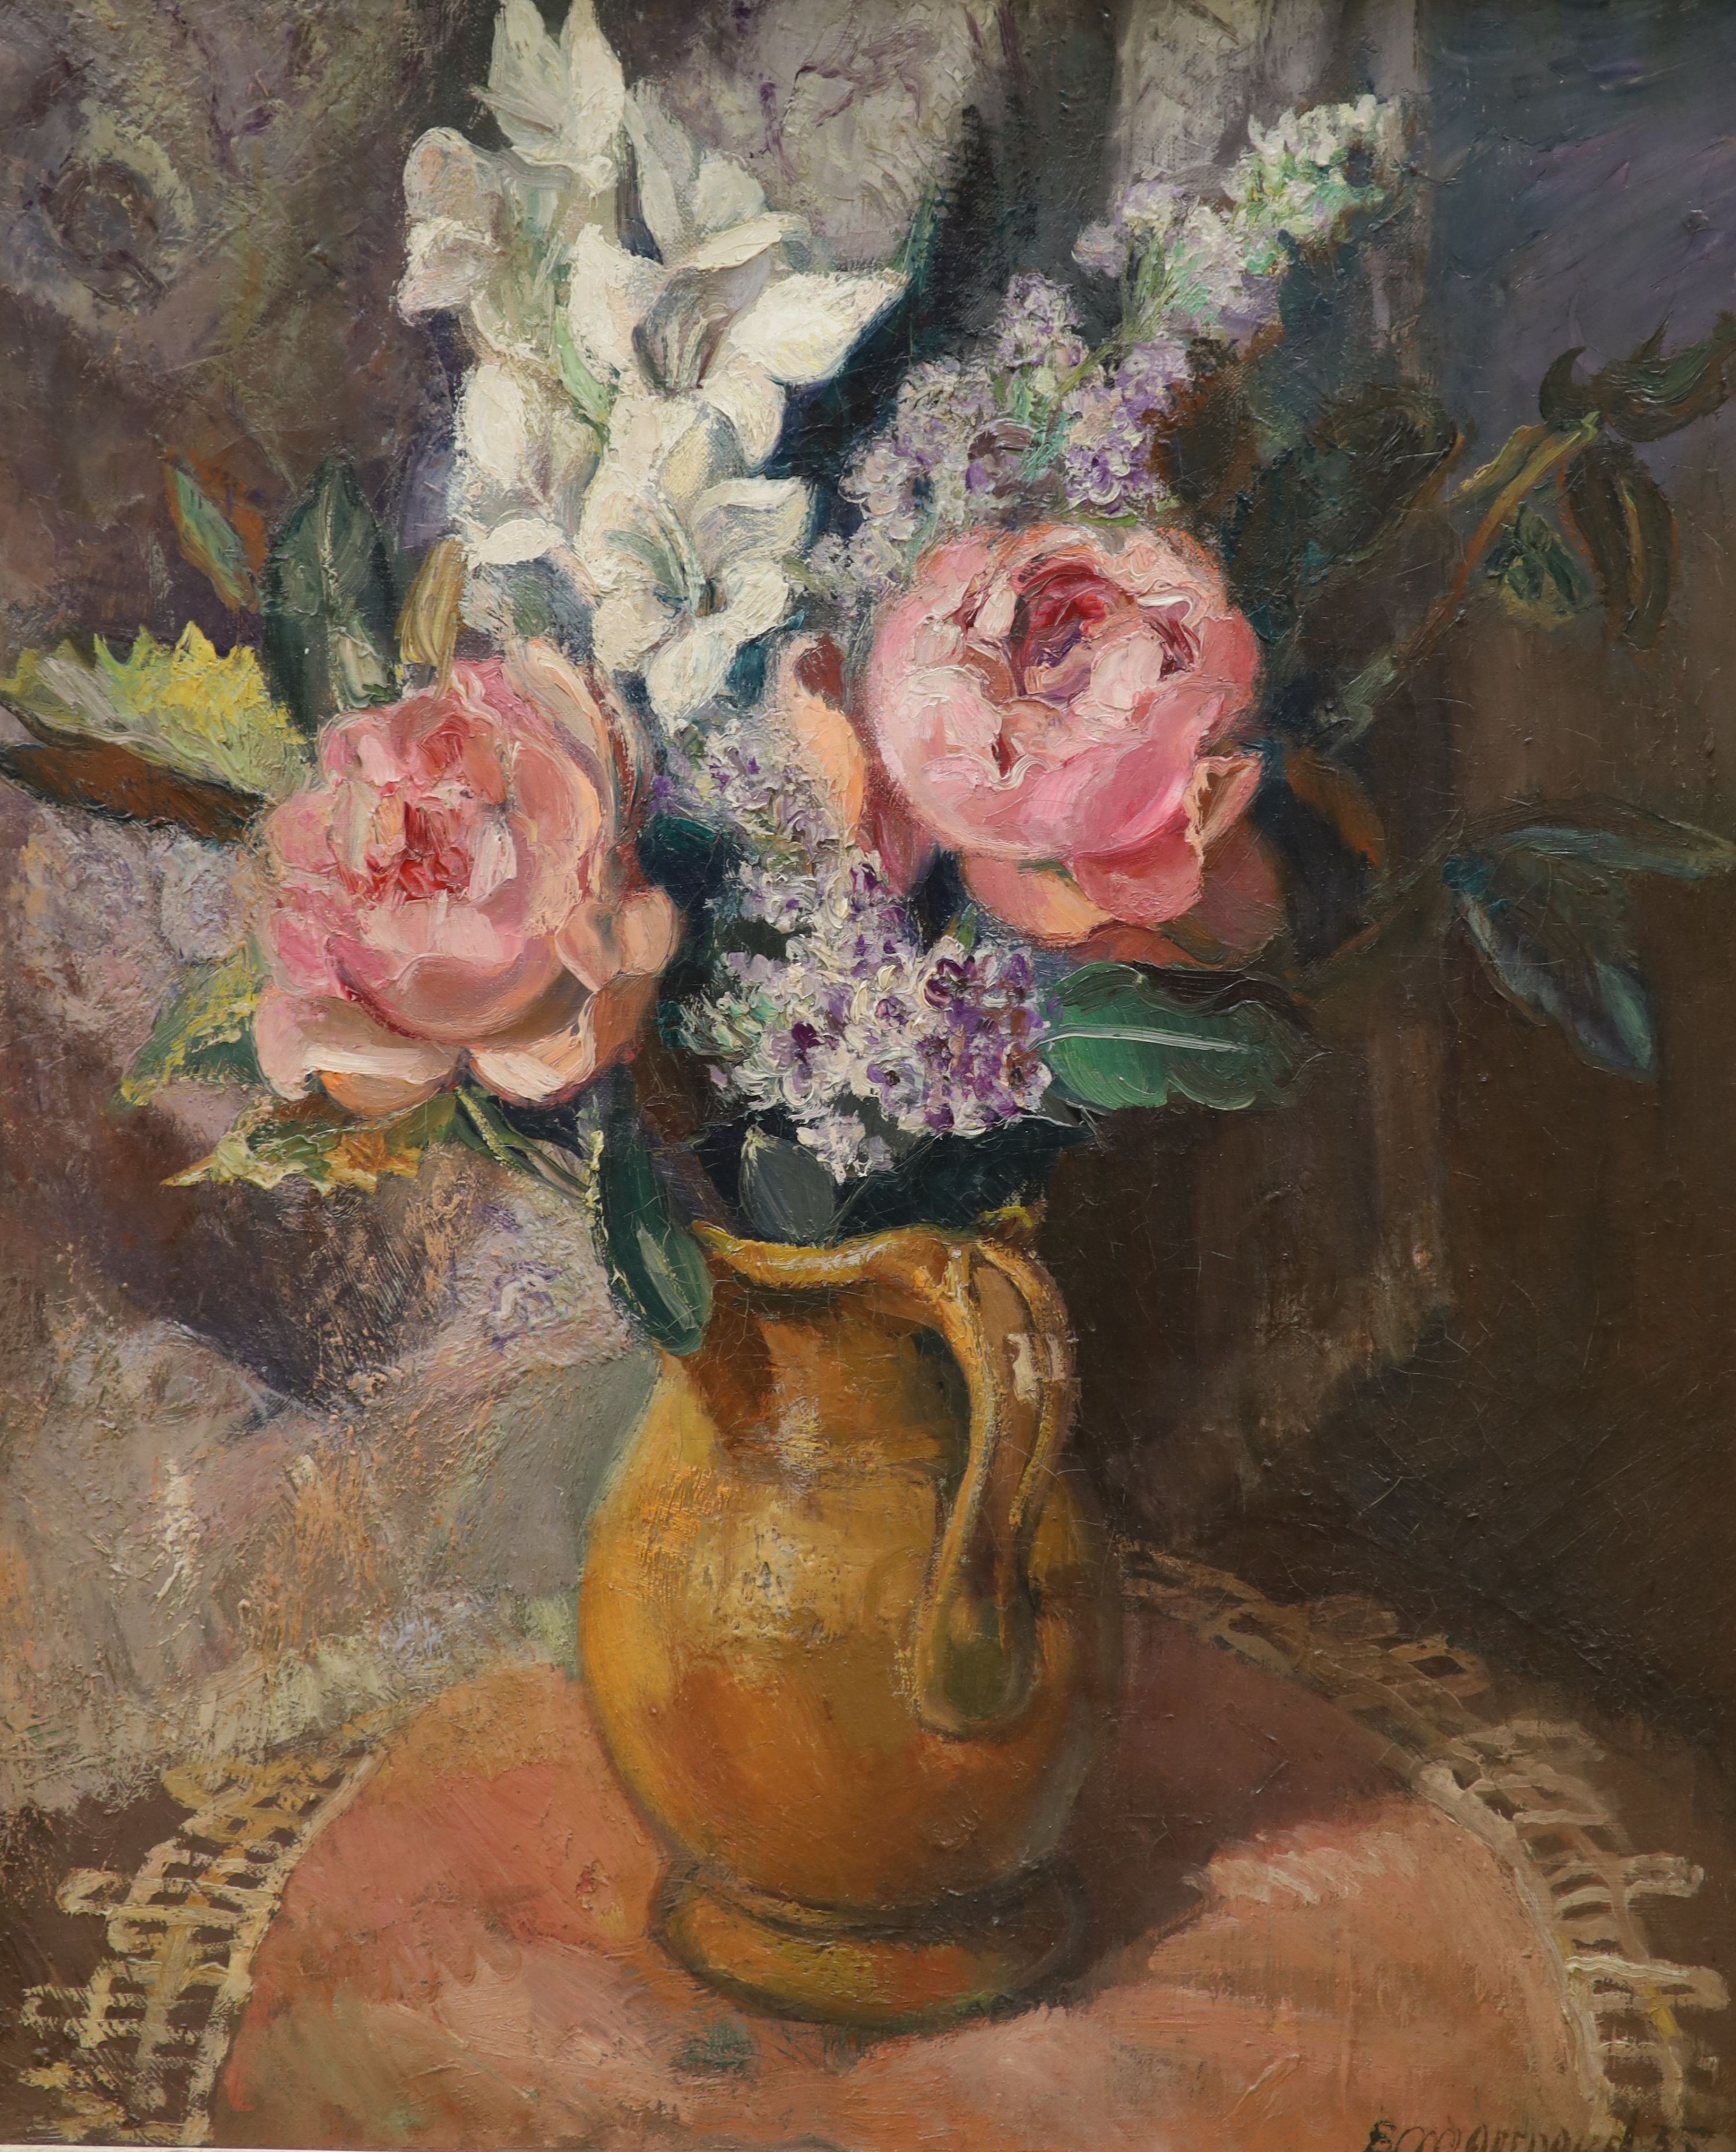 Eugène Mournaud (1903-1970), oil on canvas, still life of flowers in a jug, signed and dated 55, 64 x 53 cm.